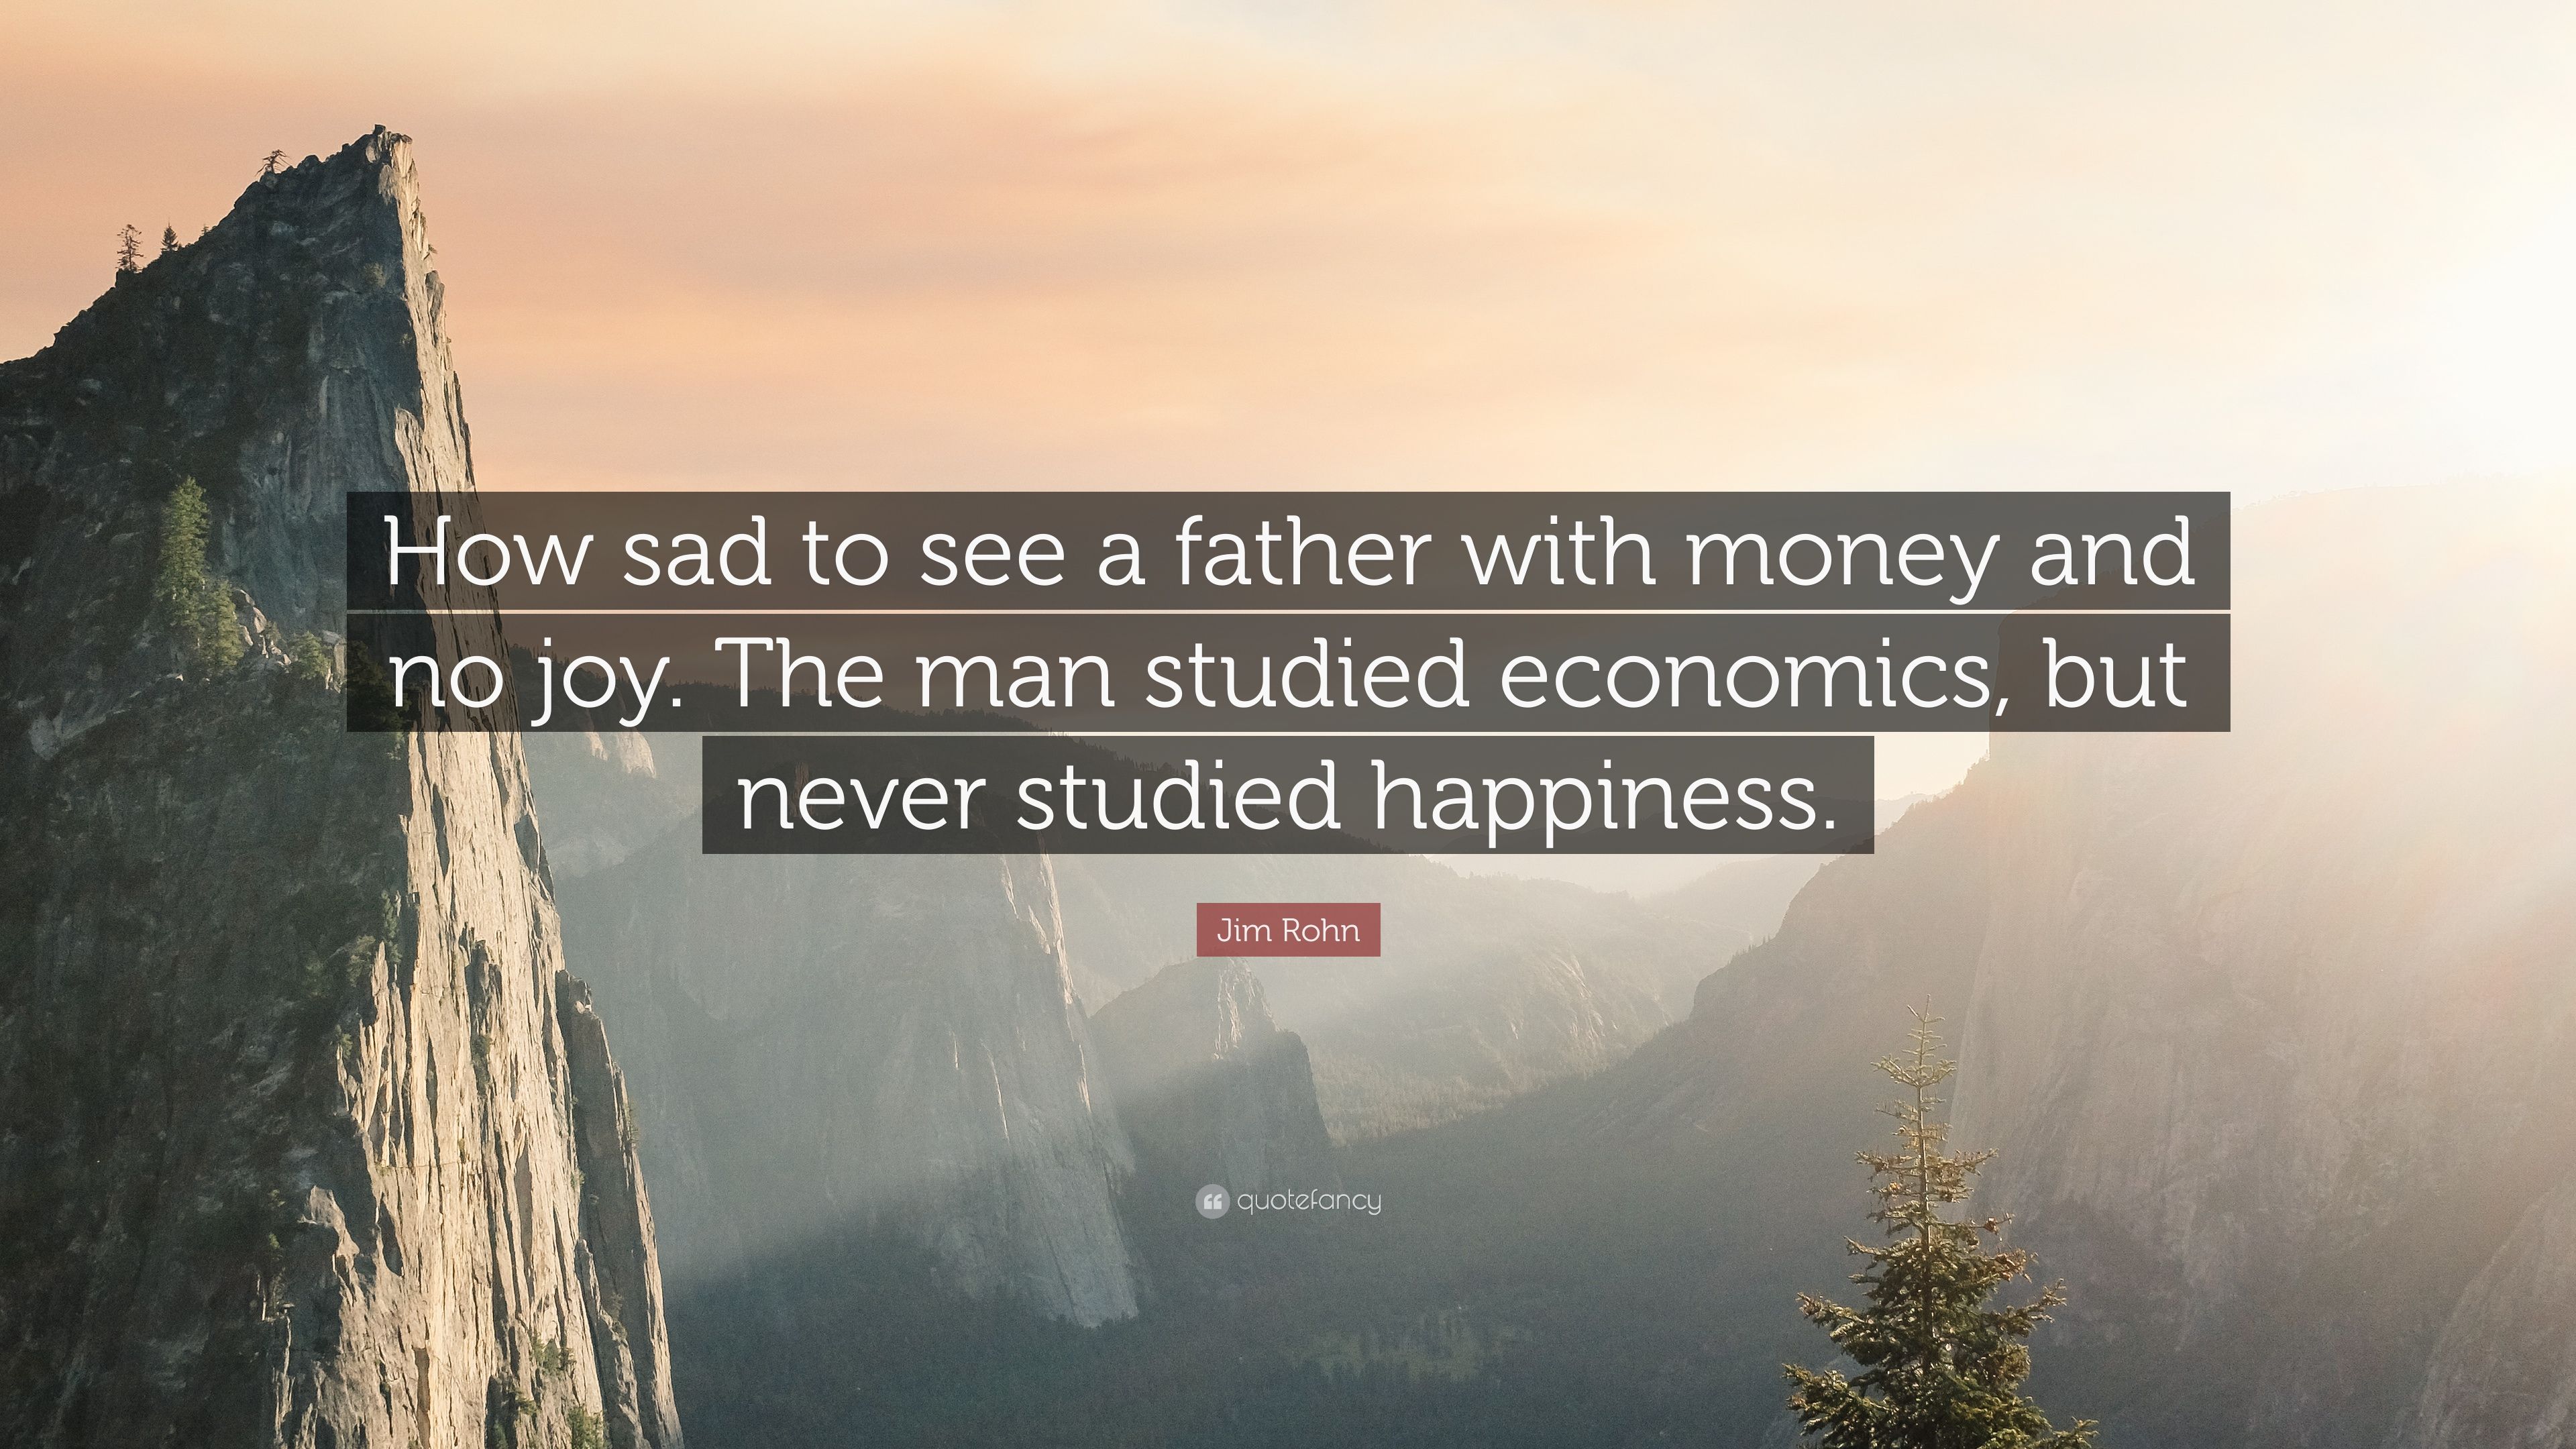 Jim Rohn Quote: “How sad to see a father with money and no joy